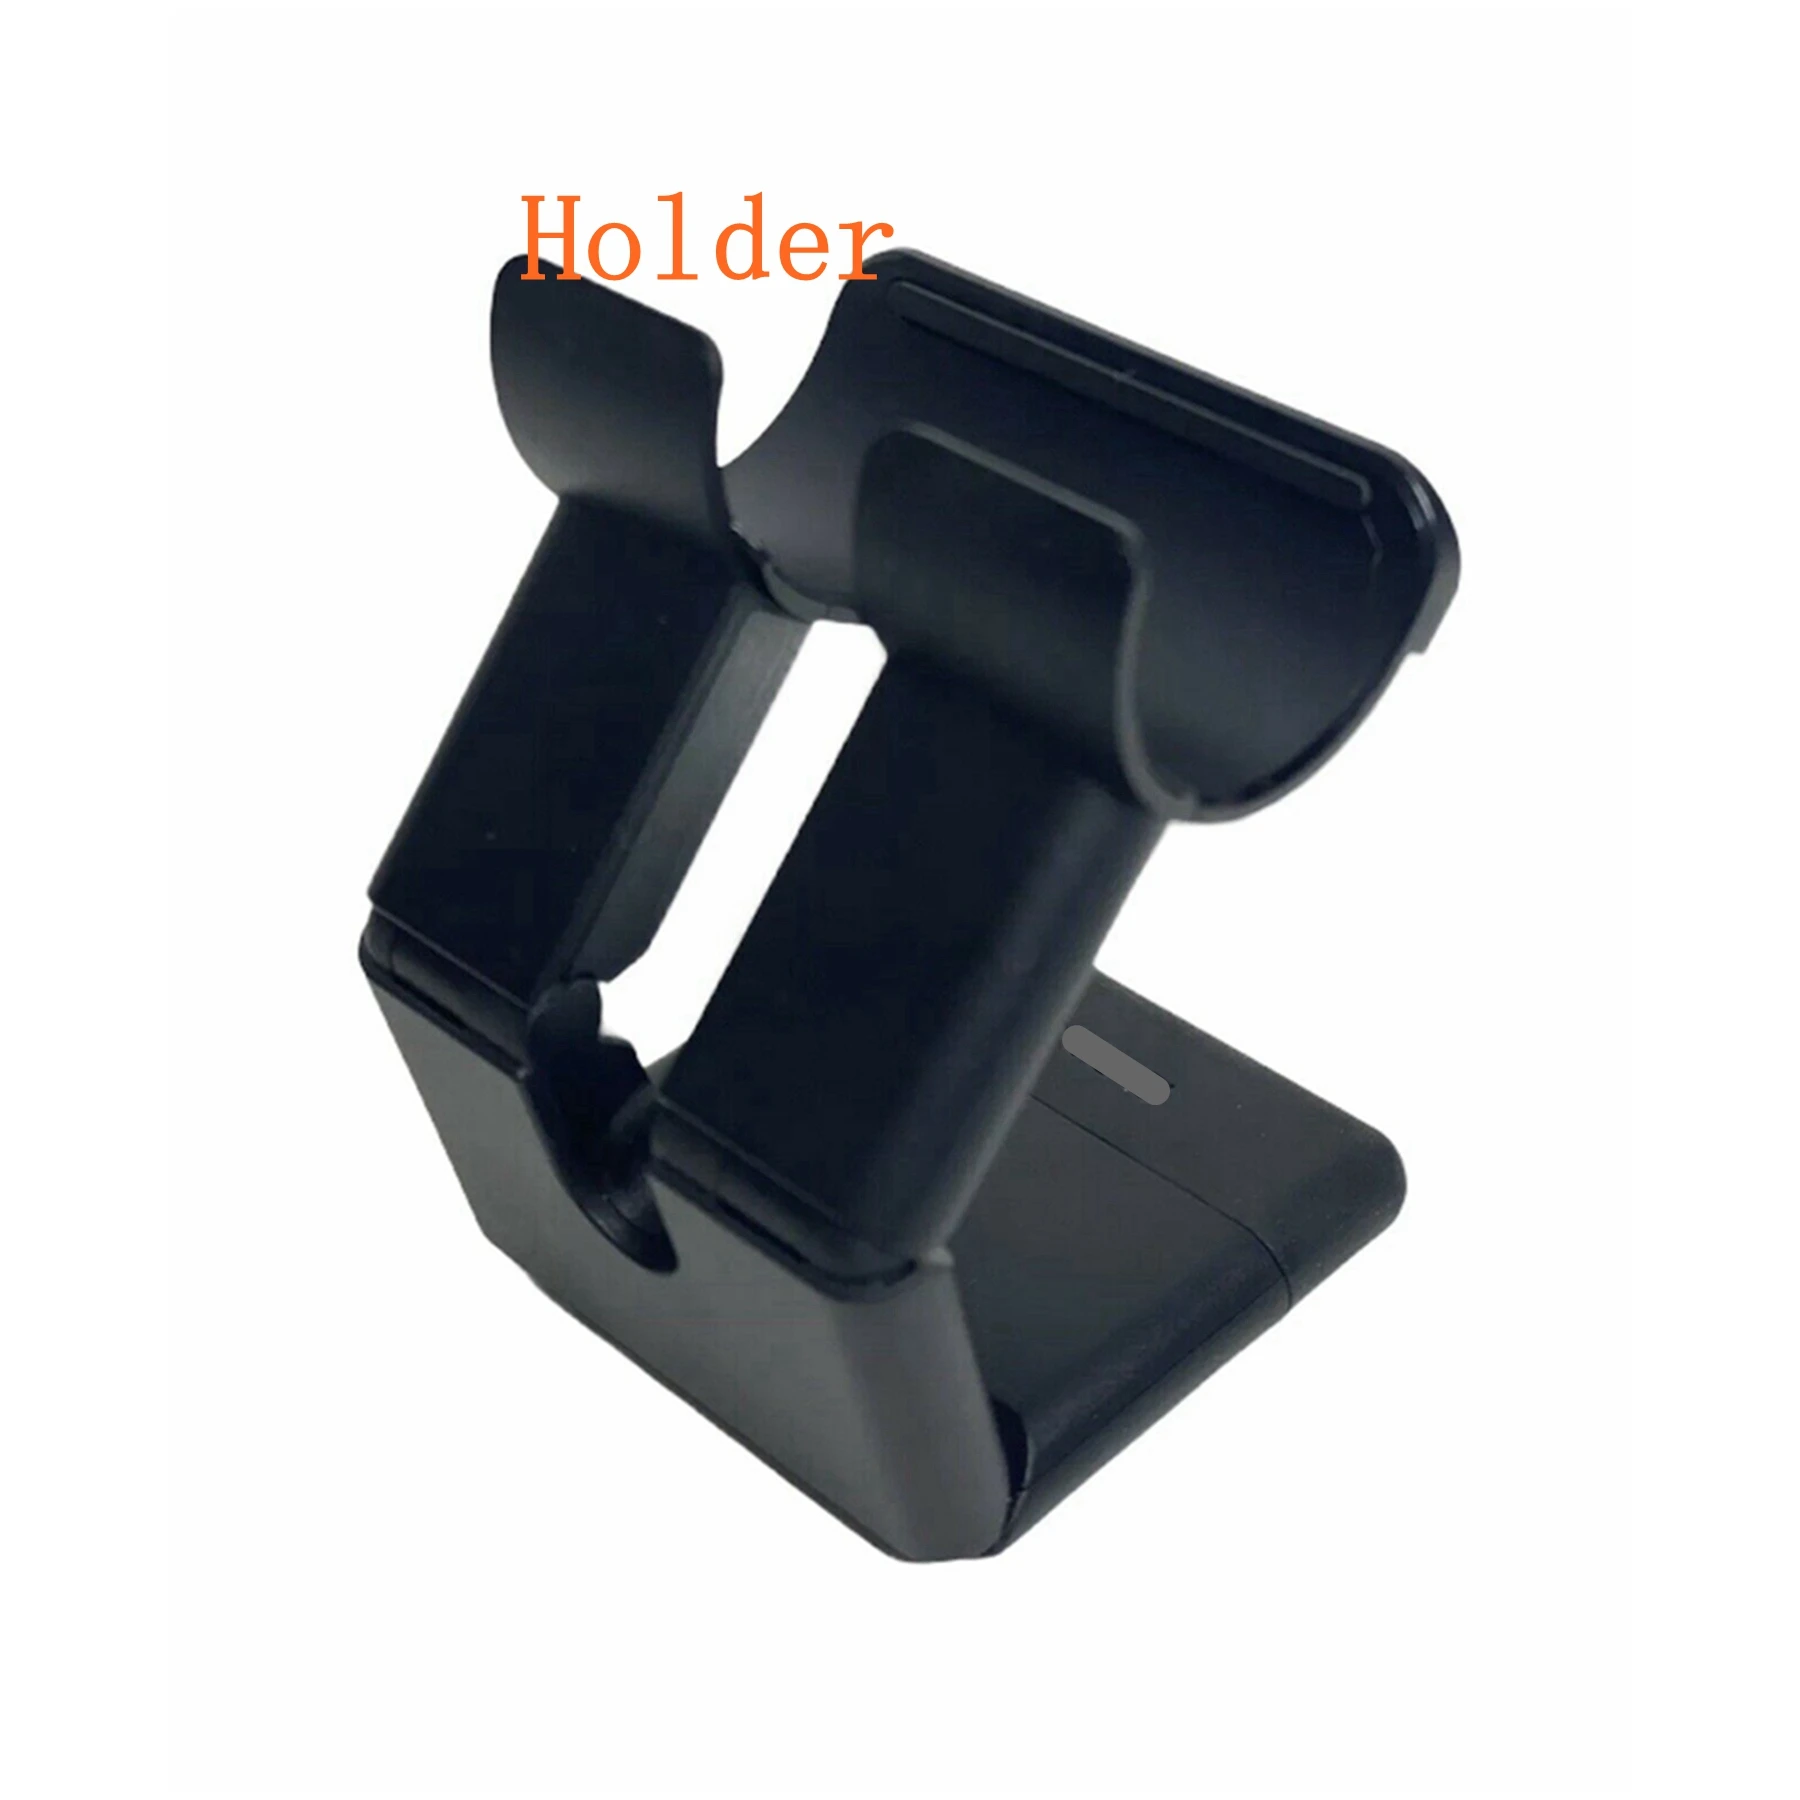 2pcs Bracket Wall Mounting Holder Support for Sony Playstation 4 PS4 PSVR  Camera